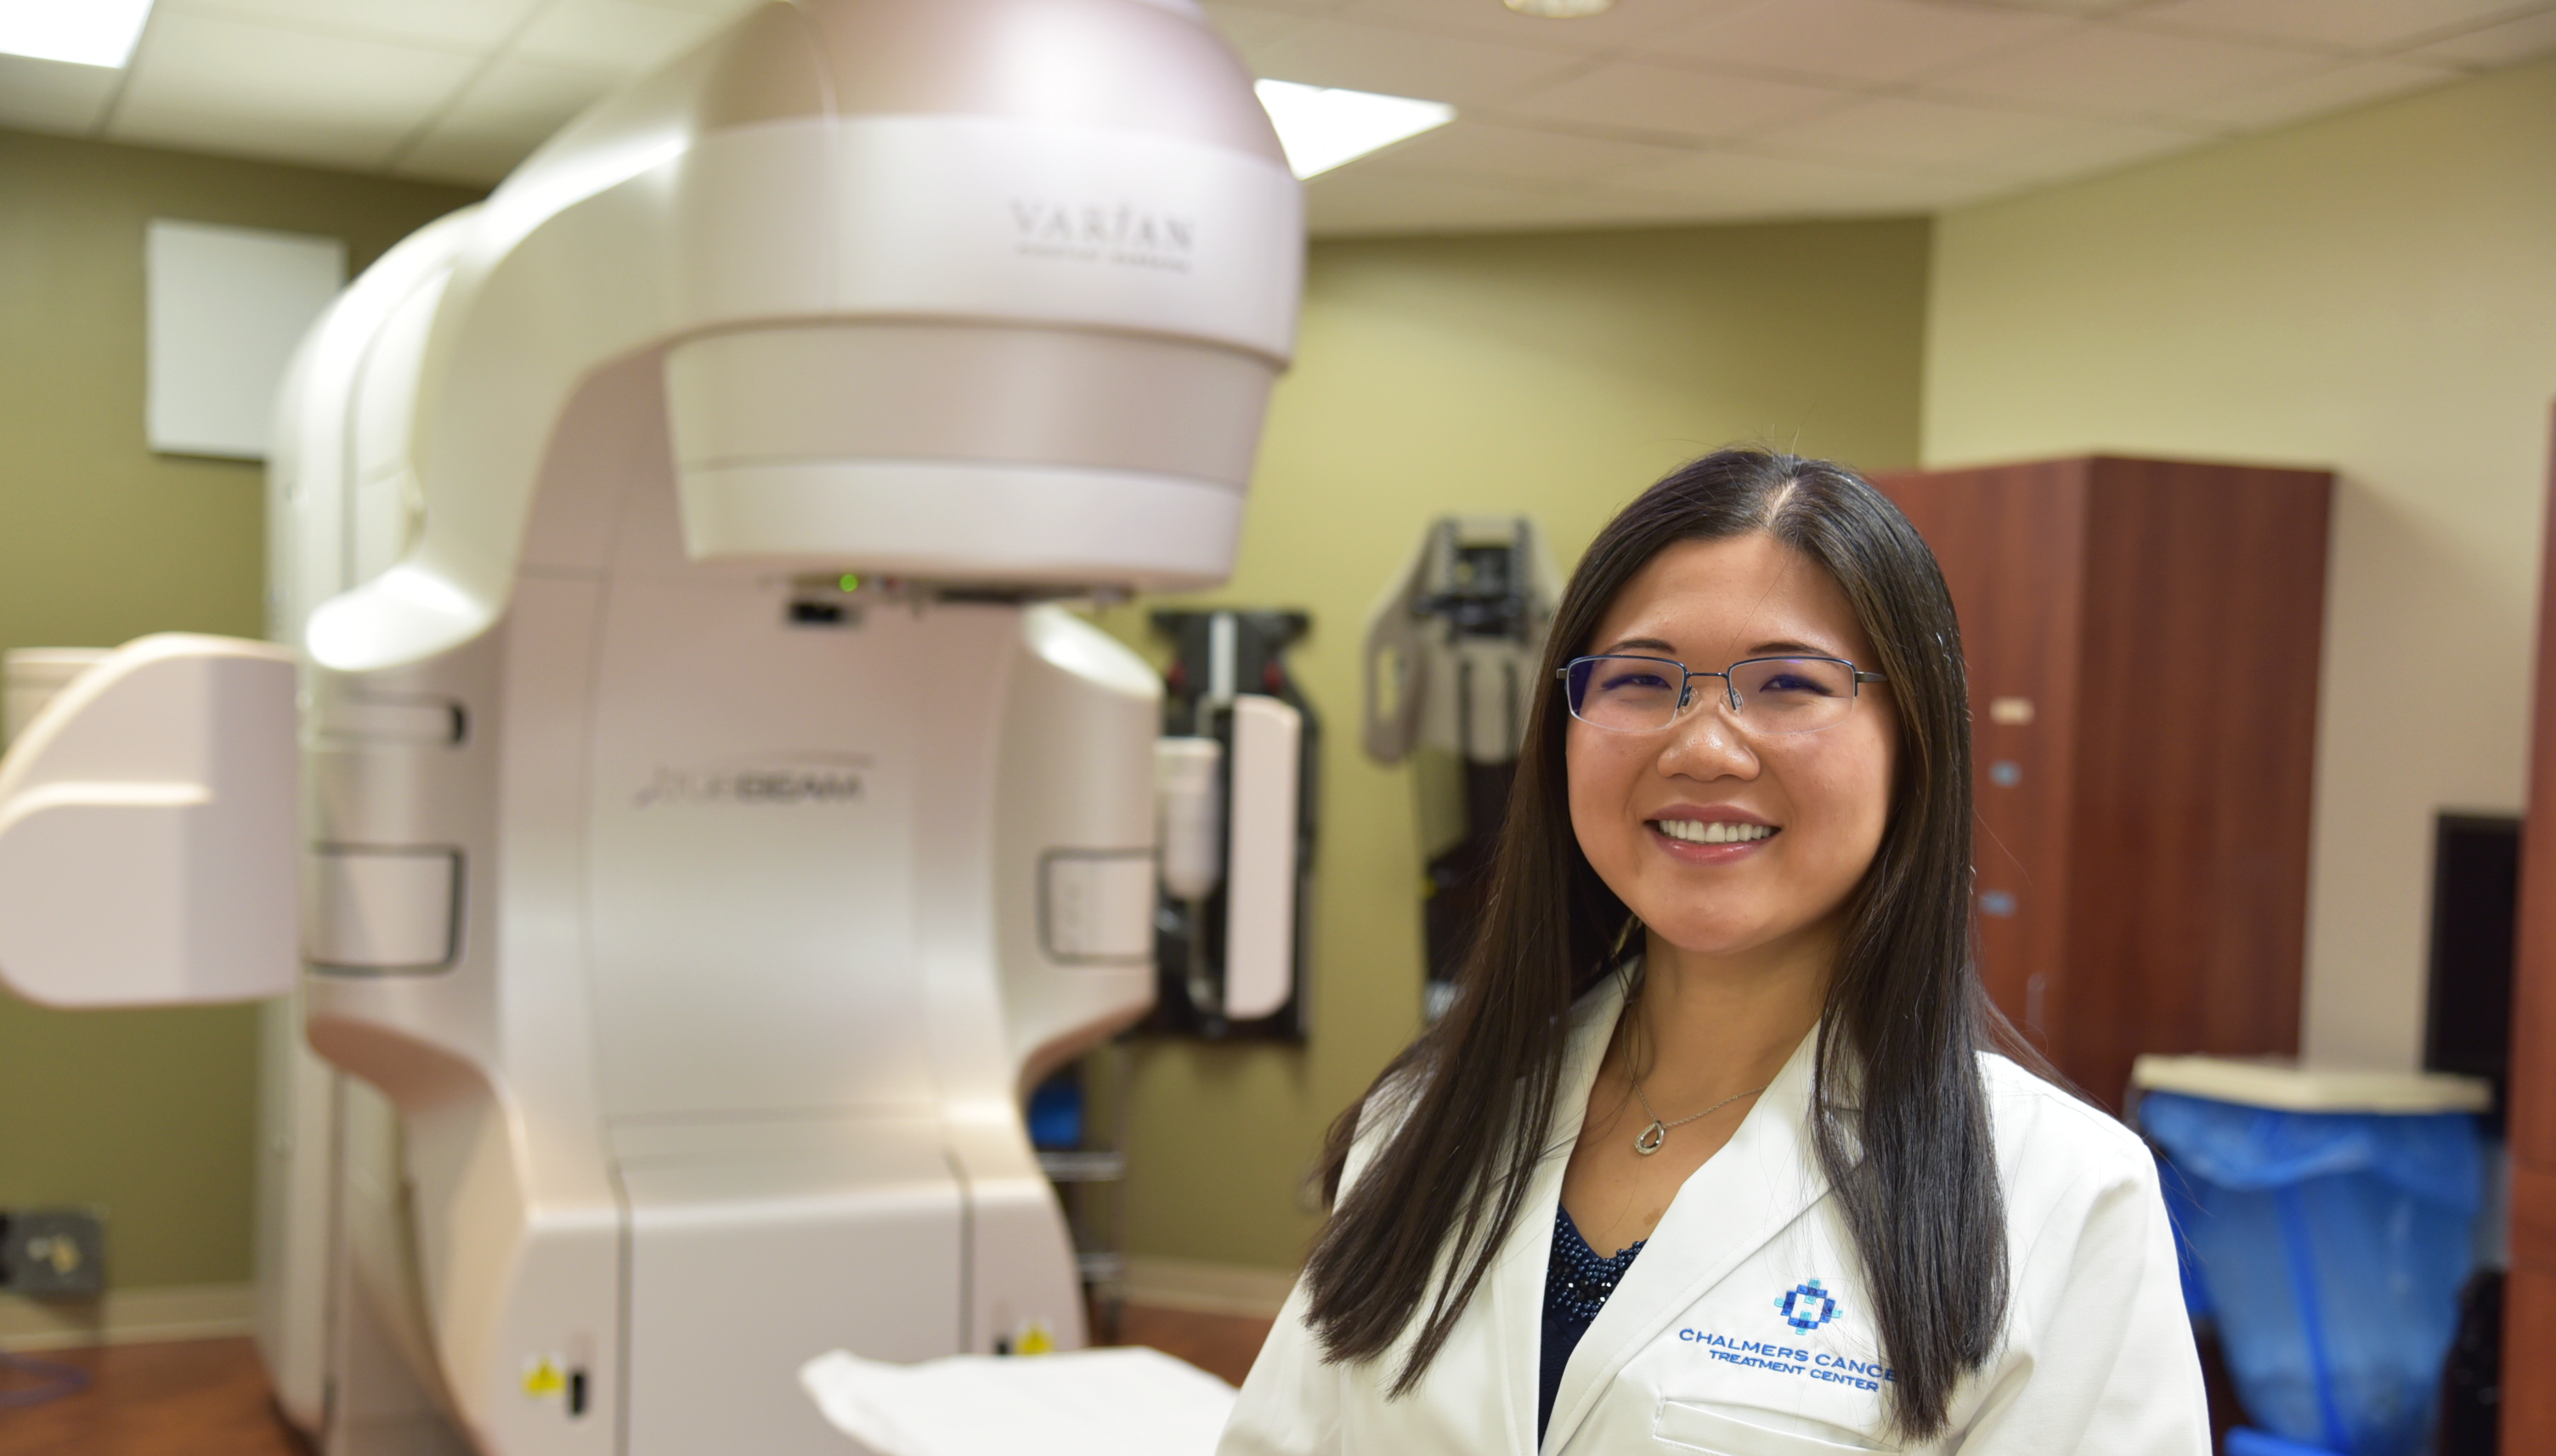 Dr. Shirley Butler-Xu, Radiation Oncologist, Hutchinson Regional Healthcare System, looking and smiling at camera with TrueBeam™ Linear Accelerator blurred out in background